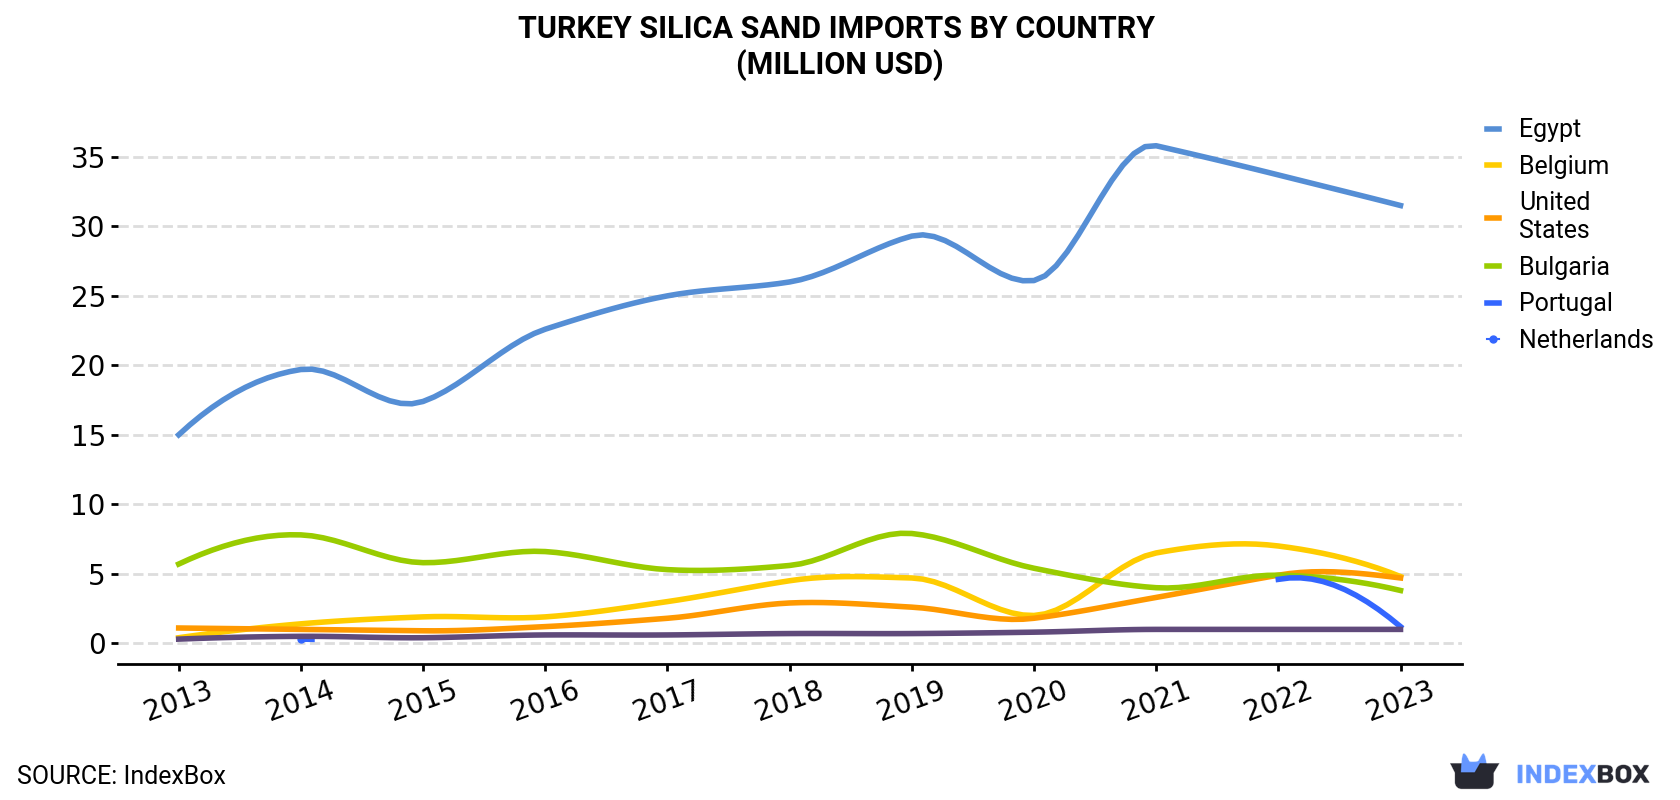 Turkey Silica Sand Imports By Country (Million USD)